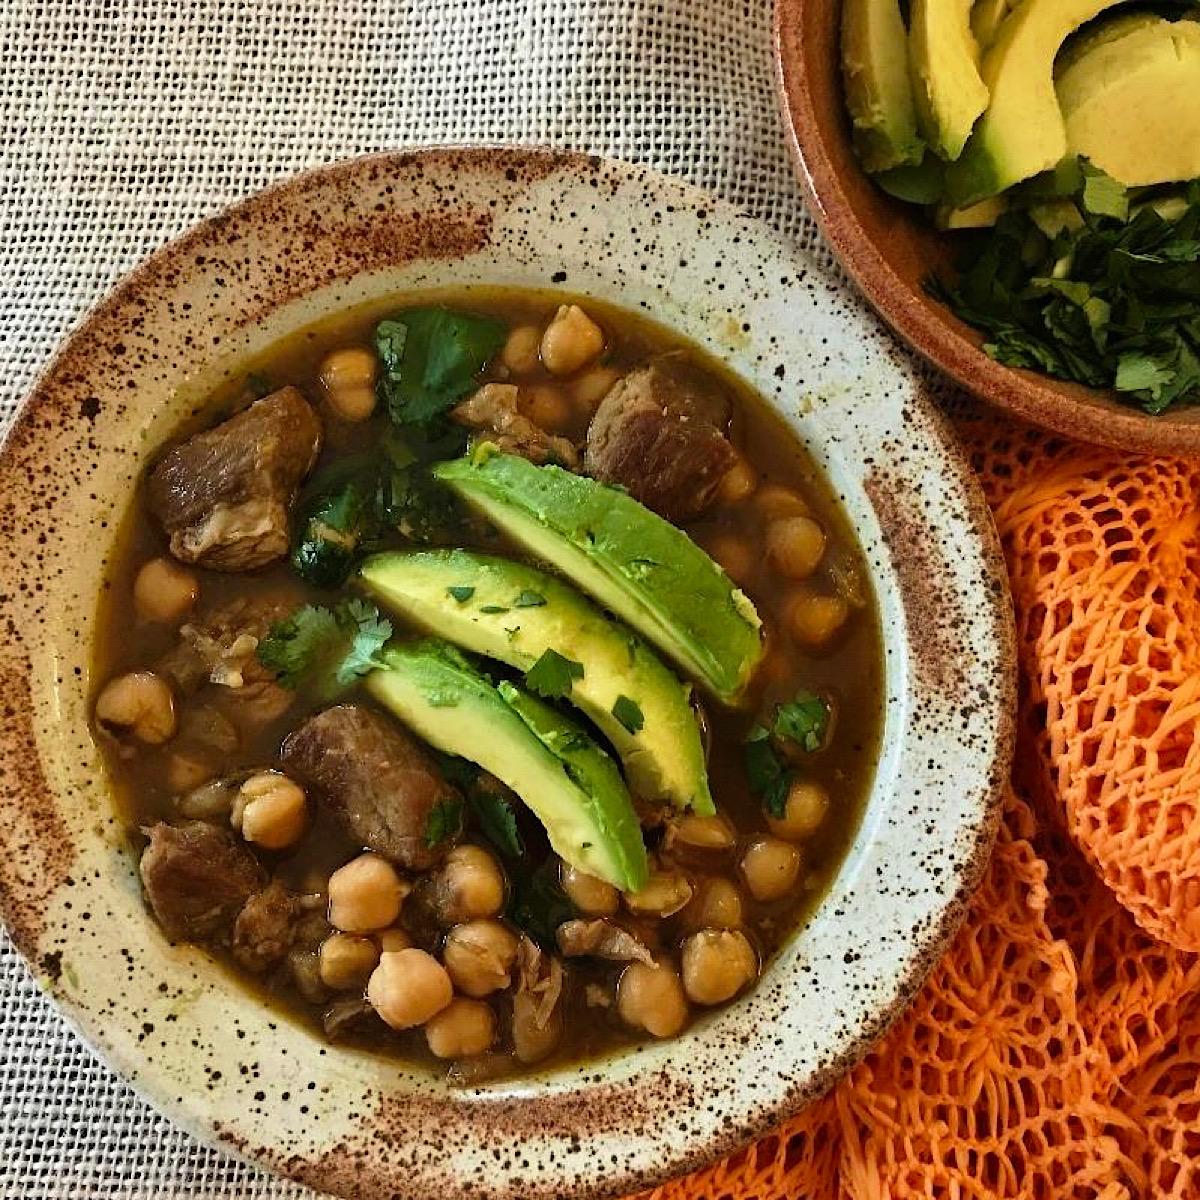 Bowl of pork posole with garbanzo beans and sliced avocado garnish